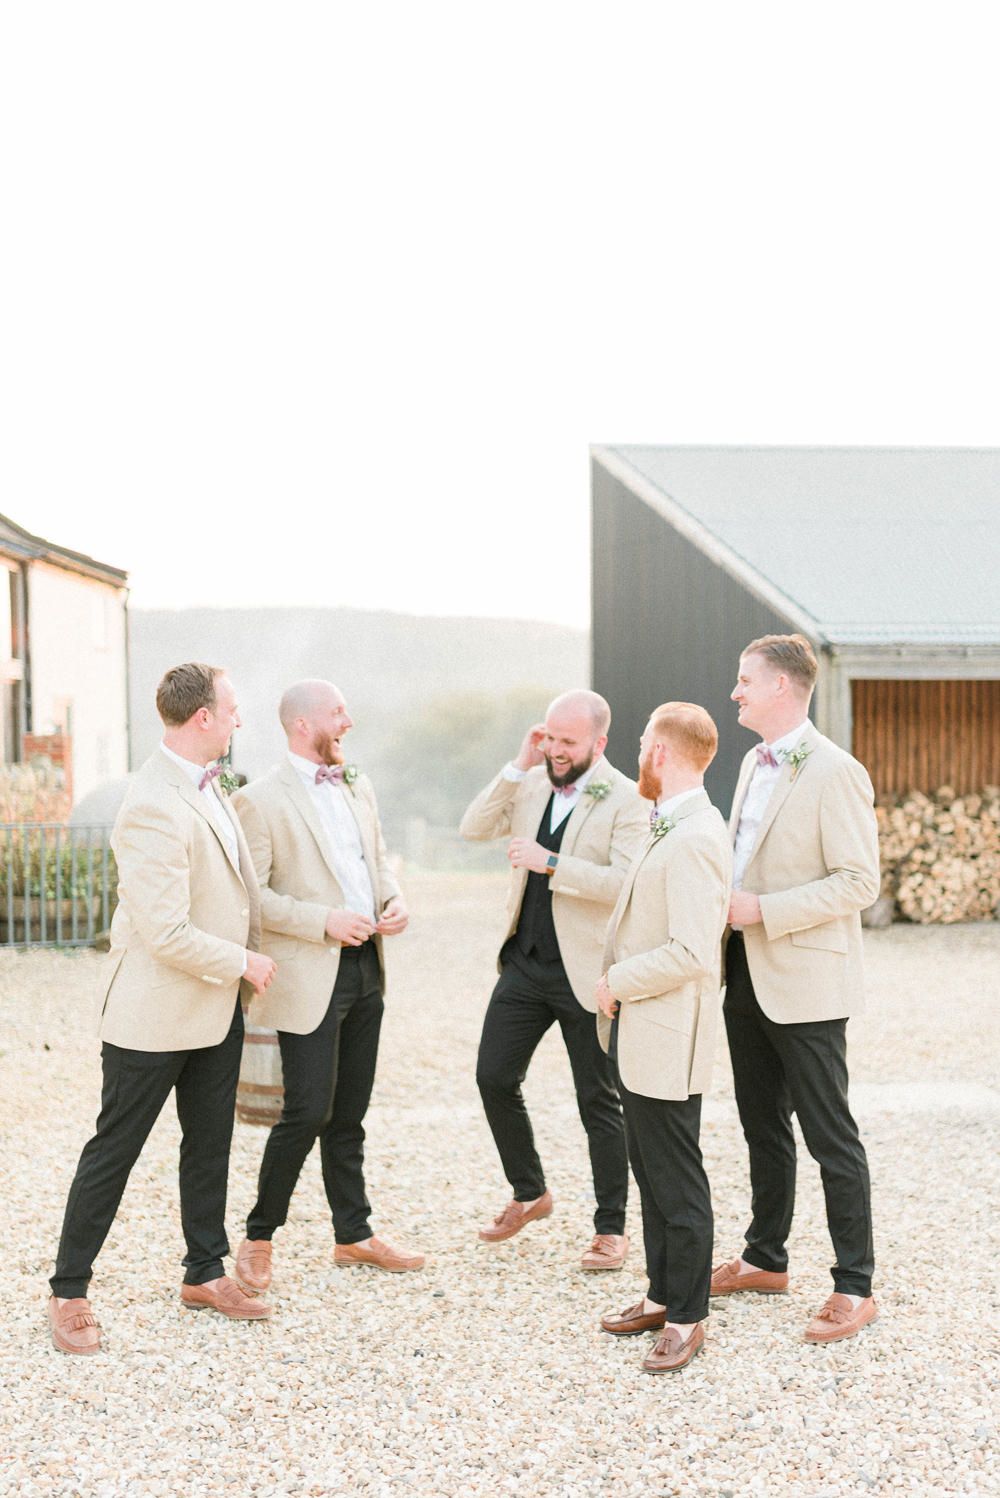 Groomsmen suits - The ultimate roundup